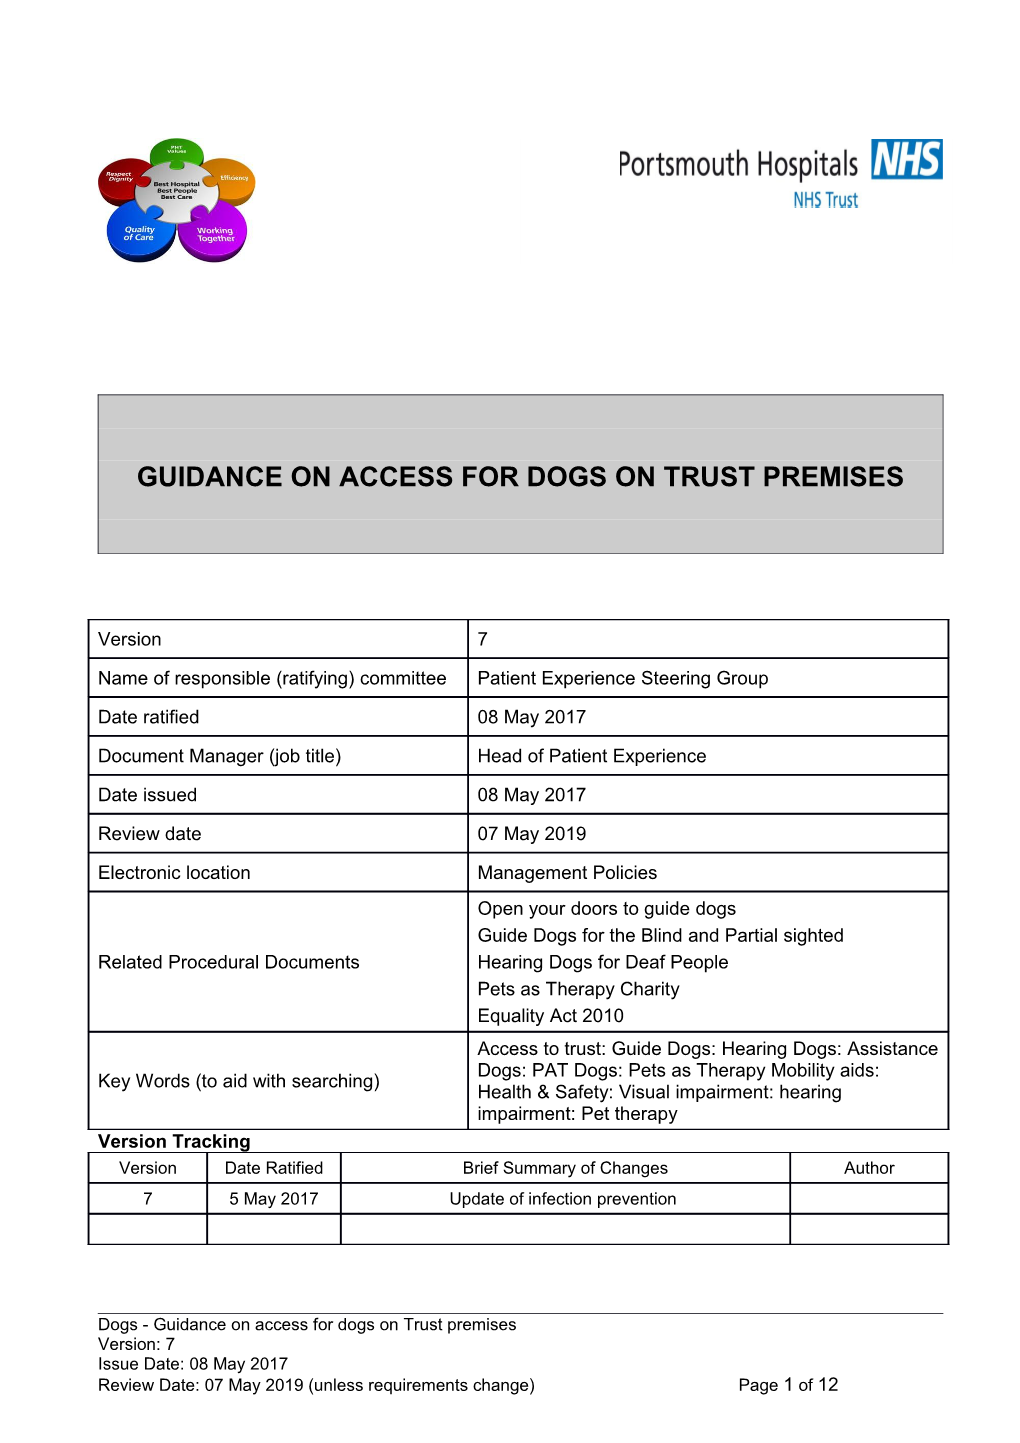 Guidance on Access for Dogs on Trust Premises